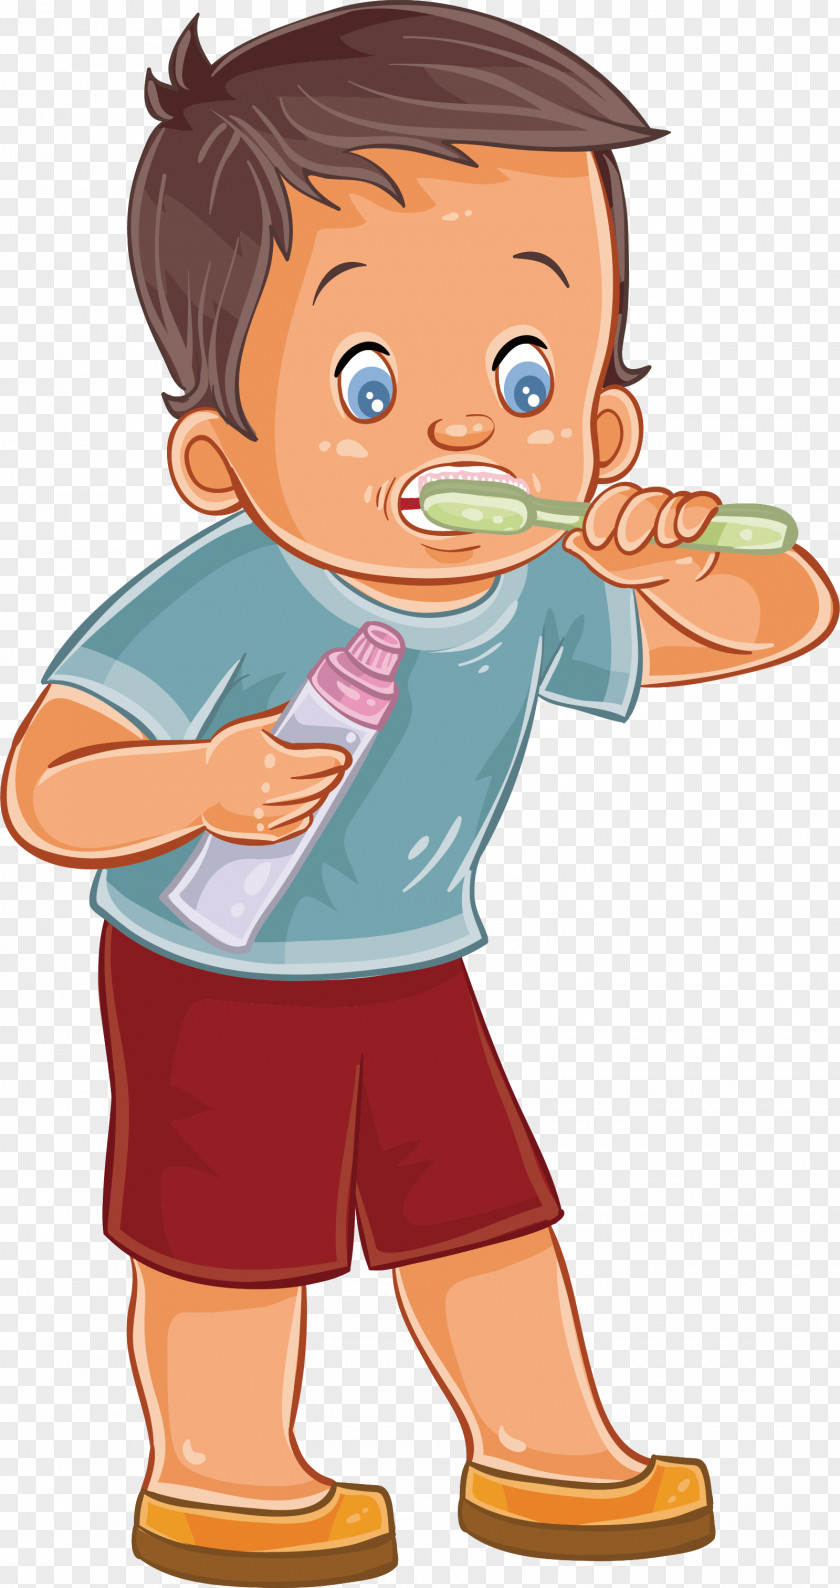 The Boy Who Brush His Teeth By Himself Tooth Brushing Photography Royalty-free Illustration PNG